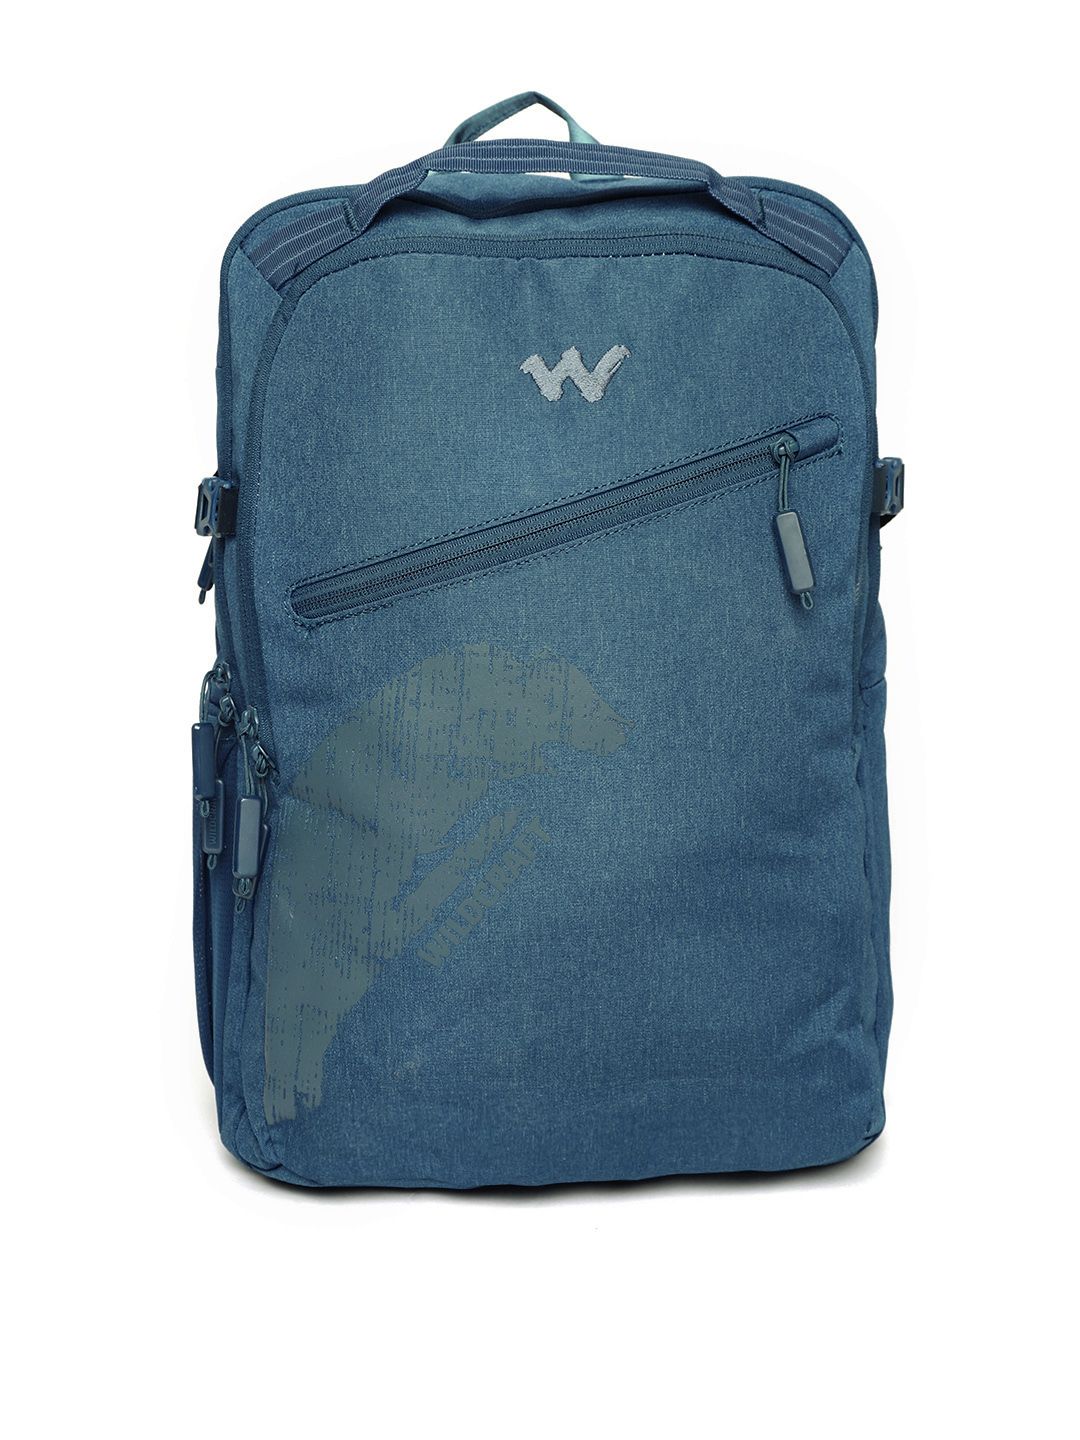 Wildcraft Unisex Navy Blue Solid Laptop Backpack Price in India